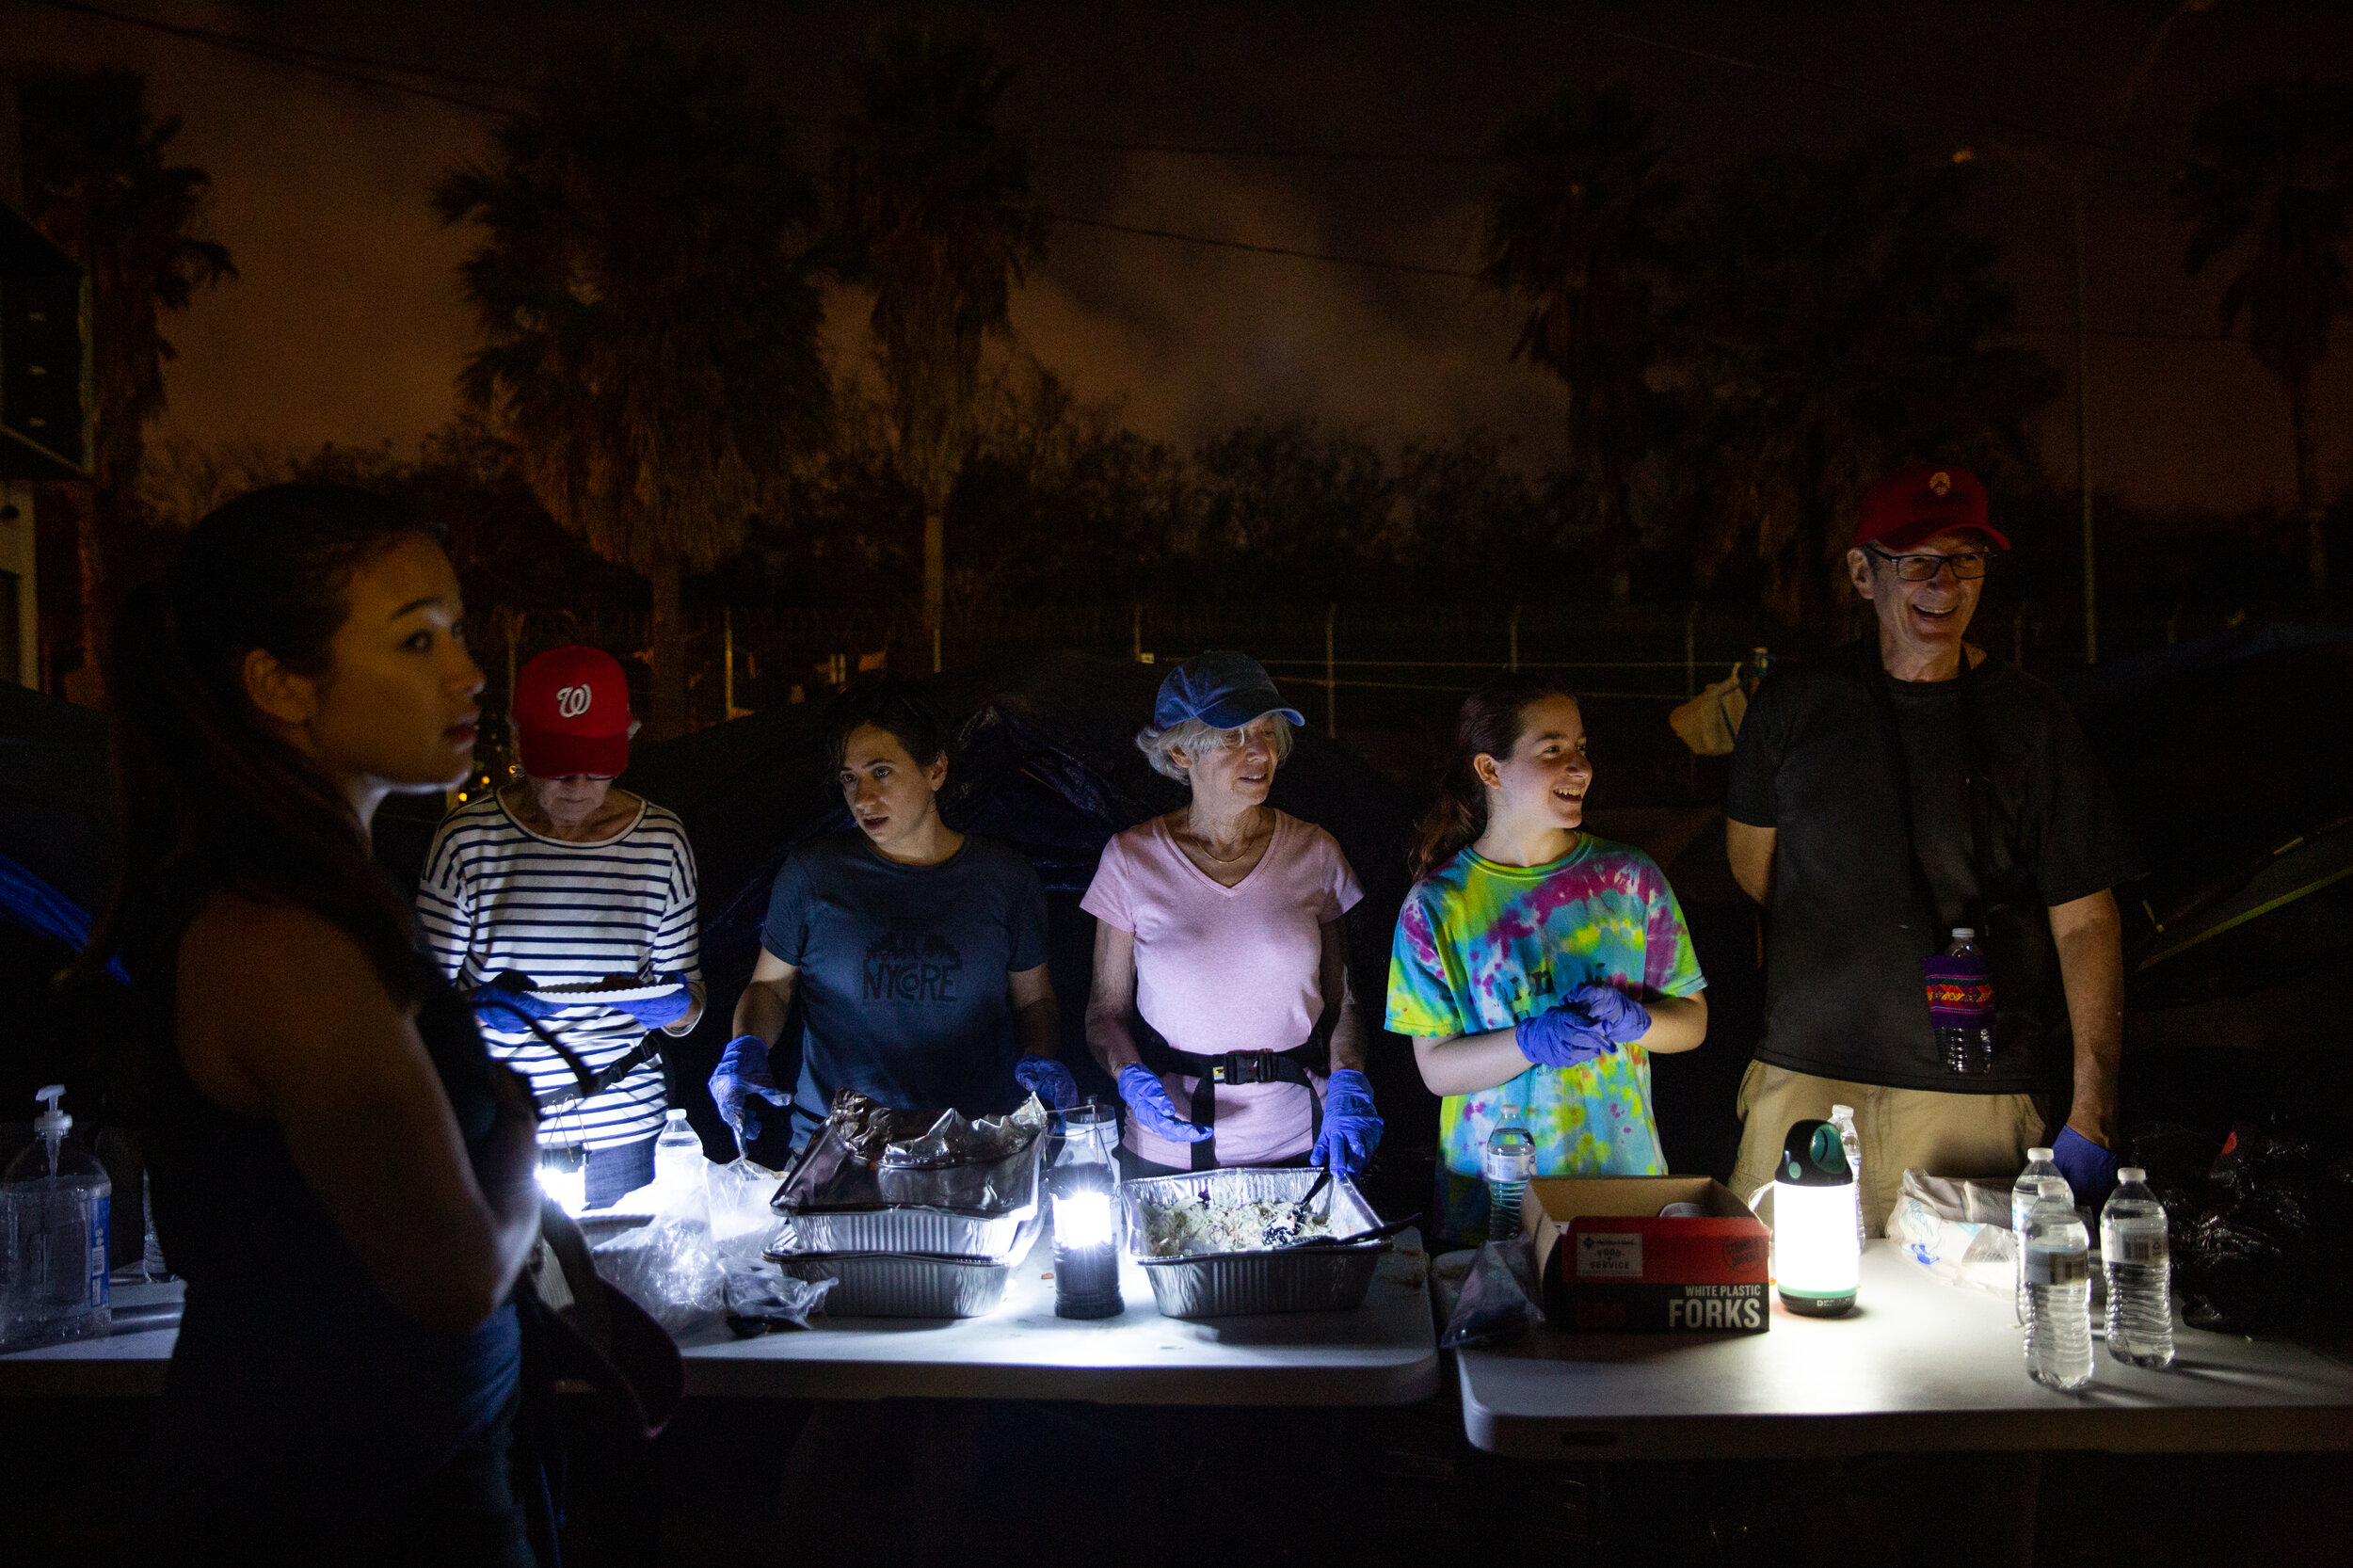  Volunteers from a synagogue in Washington D.C. serve homemade dinner to migrants outside the Matamoros encampment.  